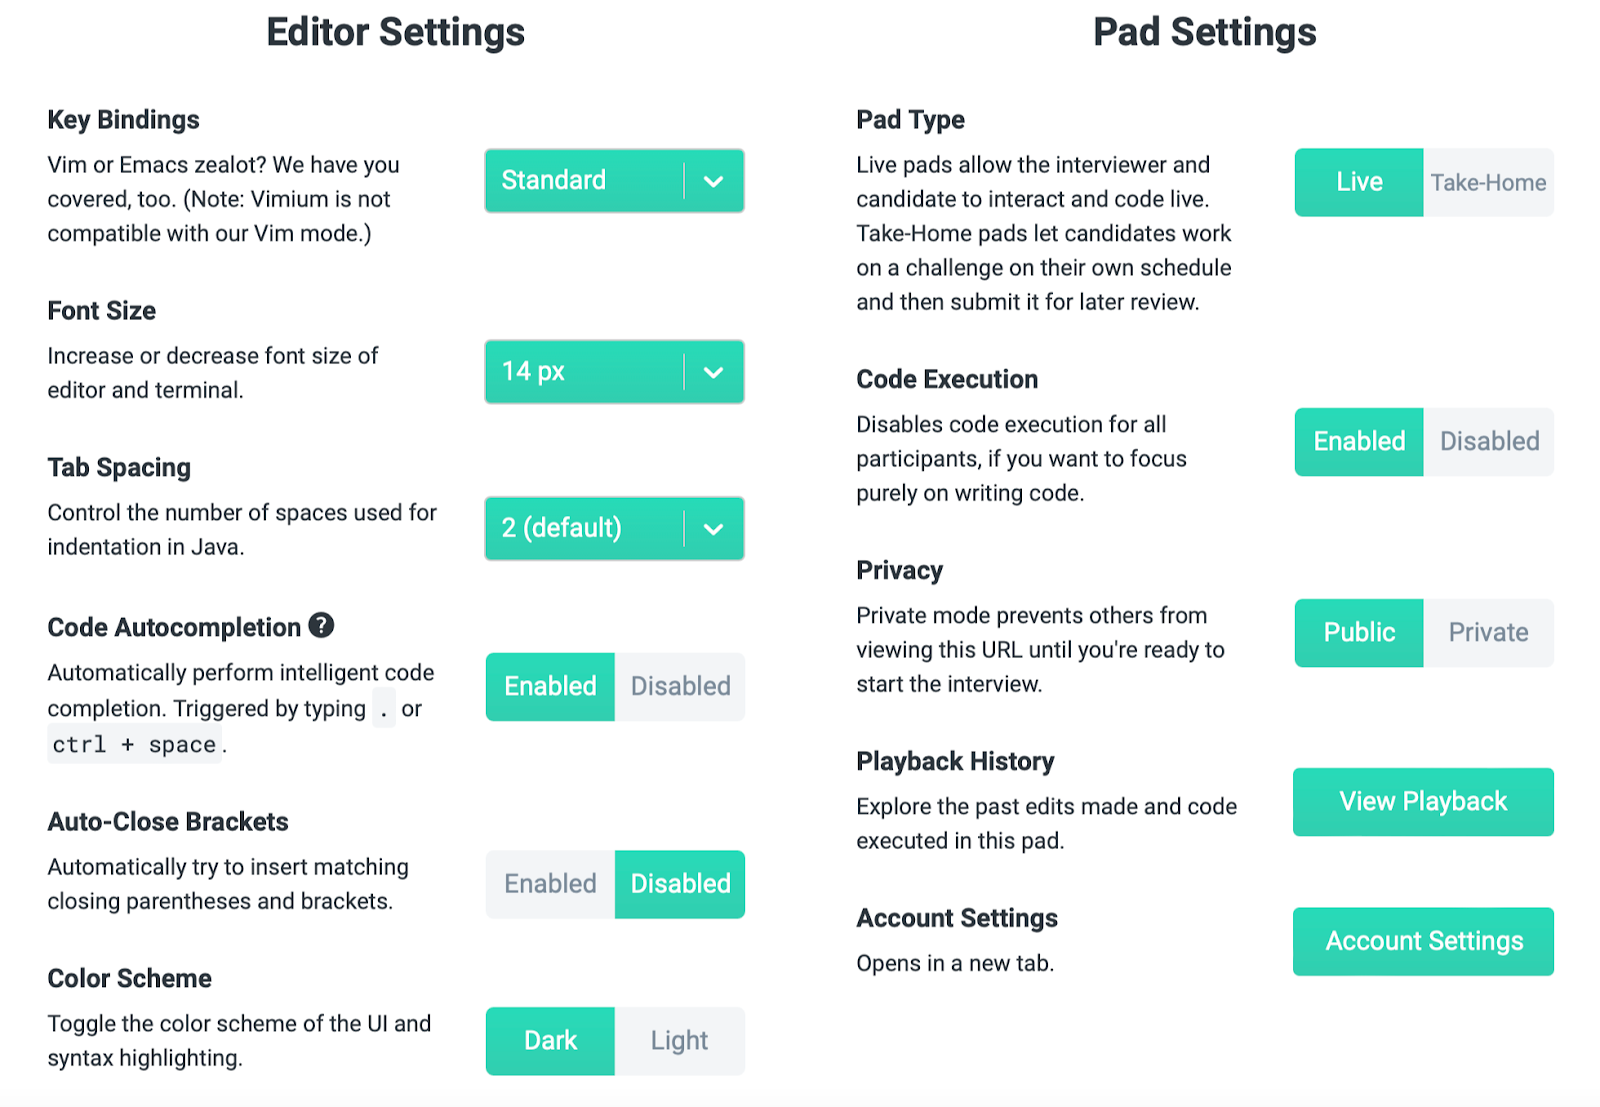 The settings window. On the left is the editor settings where you can set the key bindings, font size, tab spacing, code autocomplete, auto-close brackets, and color scheme. On the right is the pad settings where you can set the pad type, enable code execution, set the privacy, access playback and access account settings. 